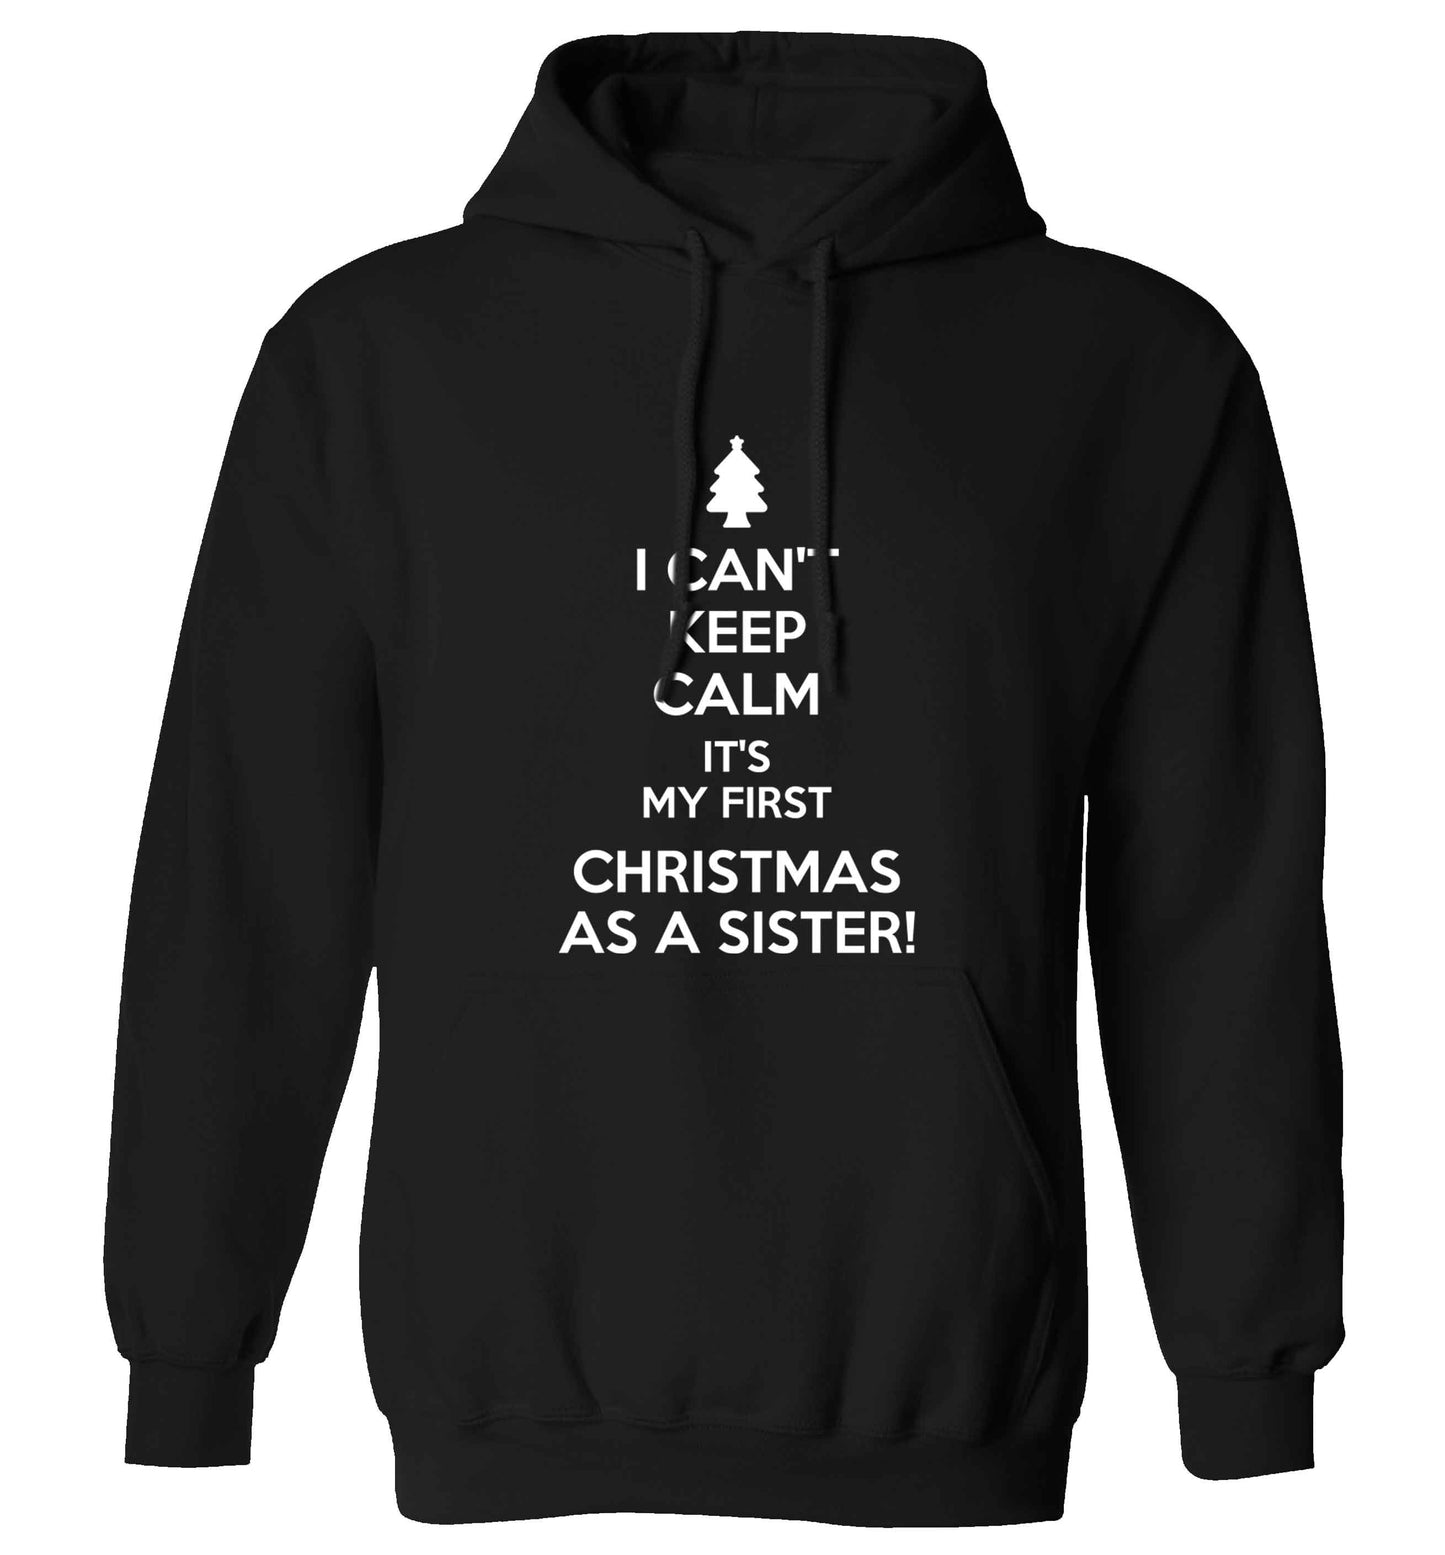 I can't keep calm it's my first Christmas as a sister! adults unisex black hoodie 2XL